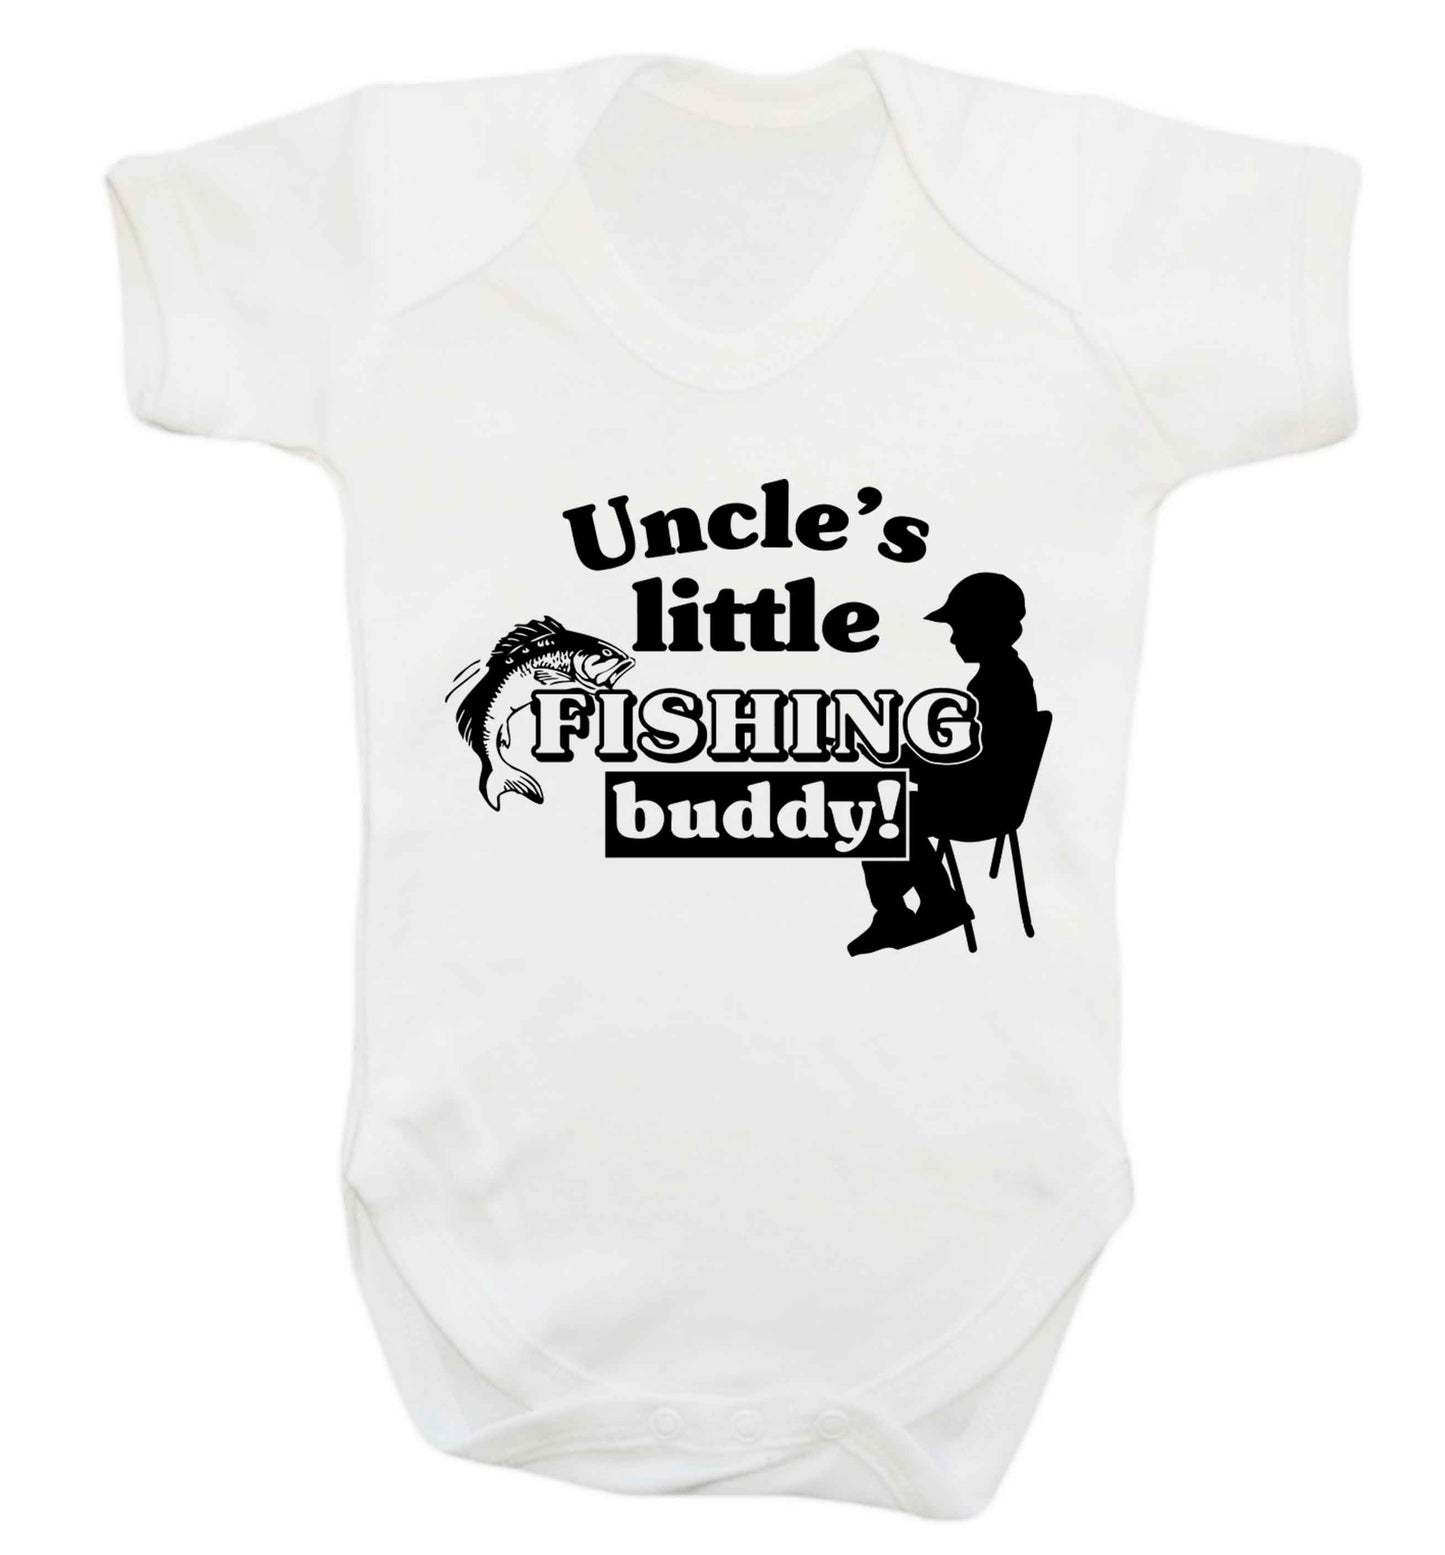 Uncle's little fishing buddy Baby Vest white 18-24 months